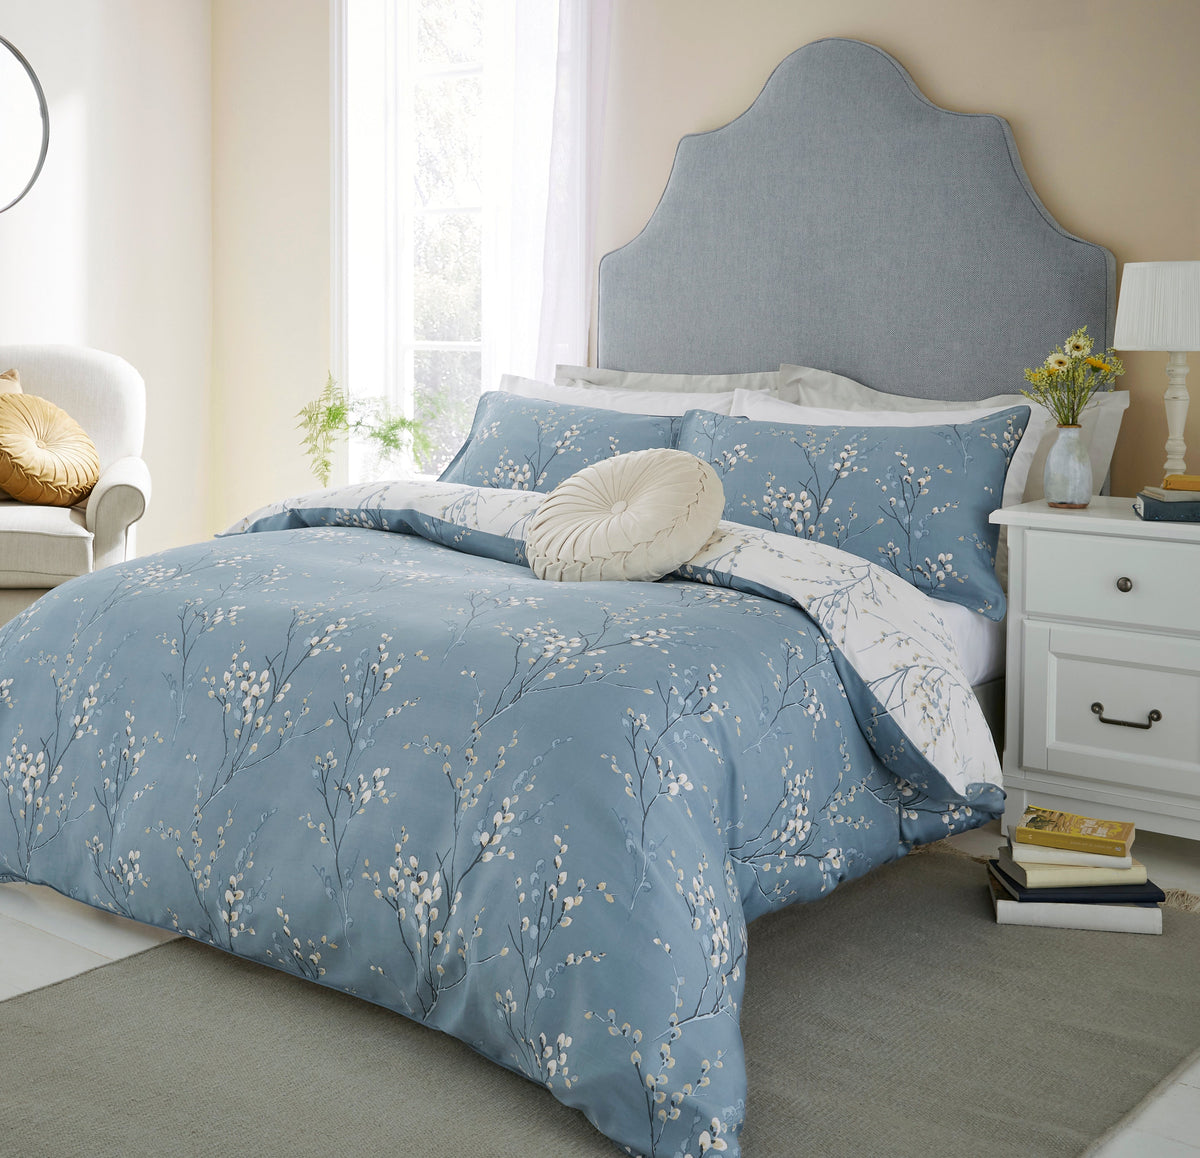 The Pussy Willow dark spray duvet set by Laura Ashley has a contrasting design detail and soft to the touch